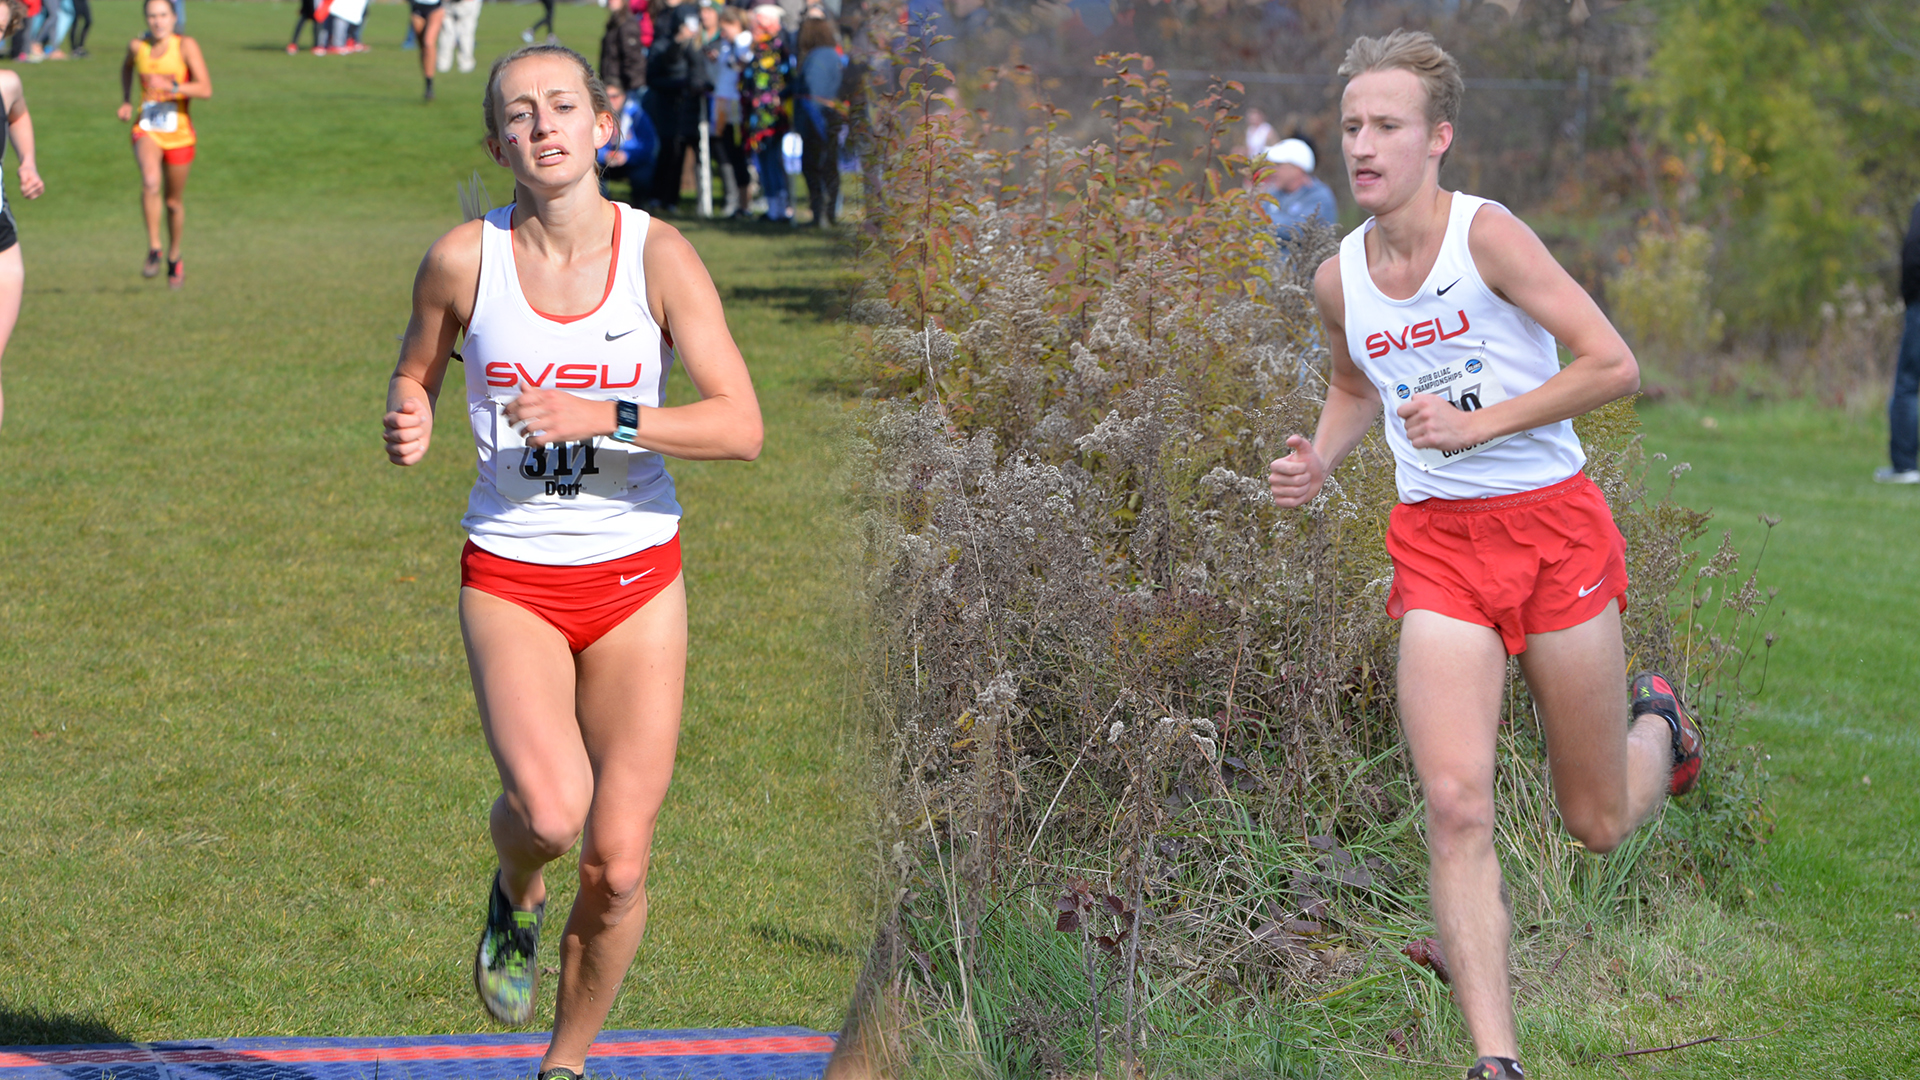 Cardinals head to the NCAA Division II Cross Country Championship Saturday